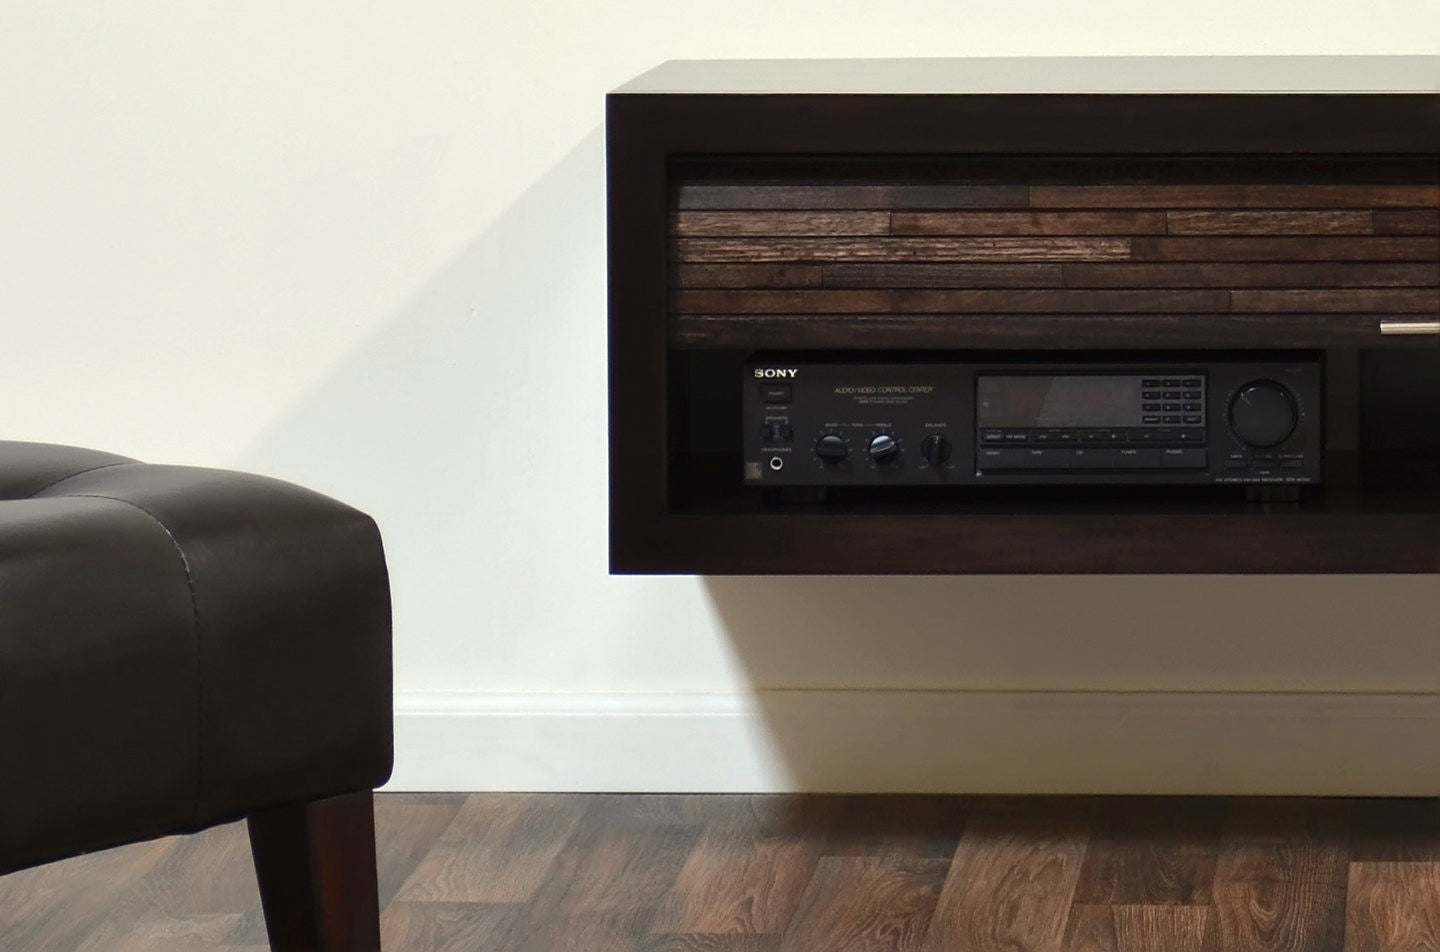 Woodwaves - Floating TV Stand - Wall Mounted Media Console - ECO GEO Espresso